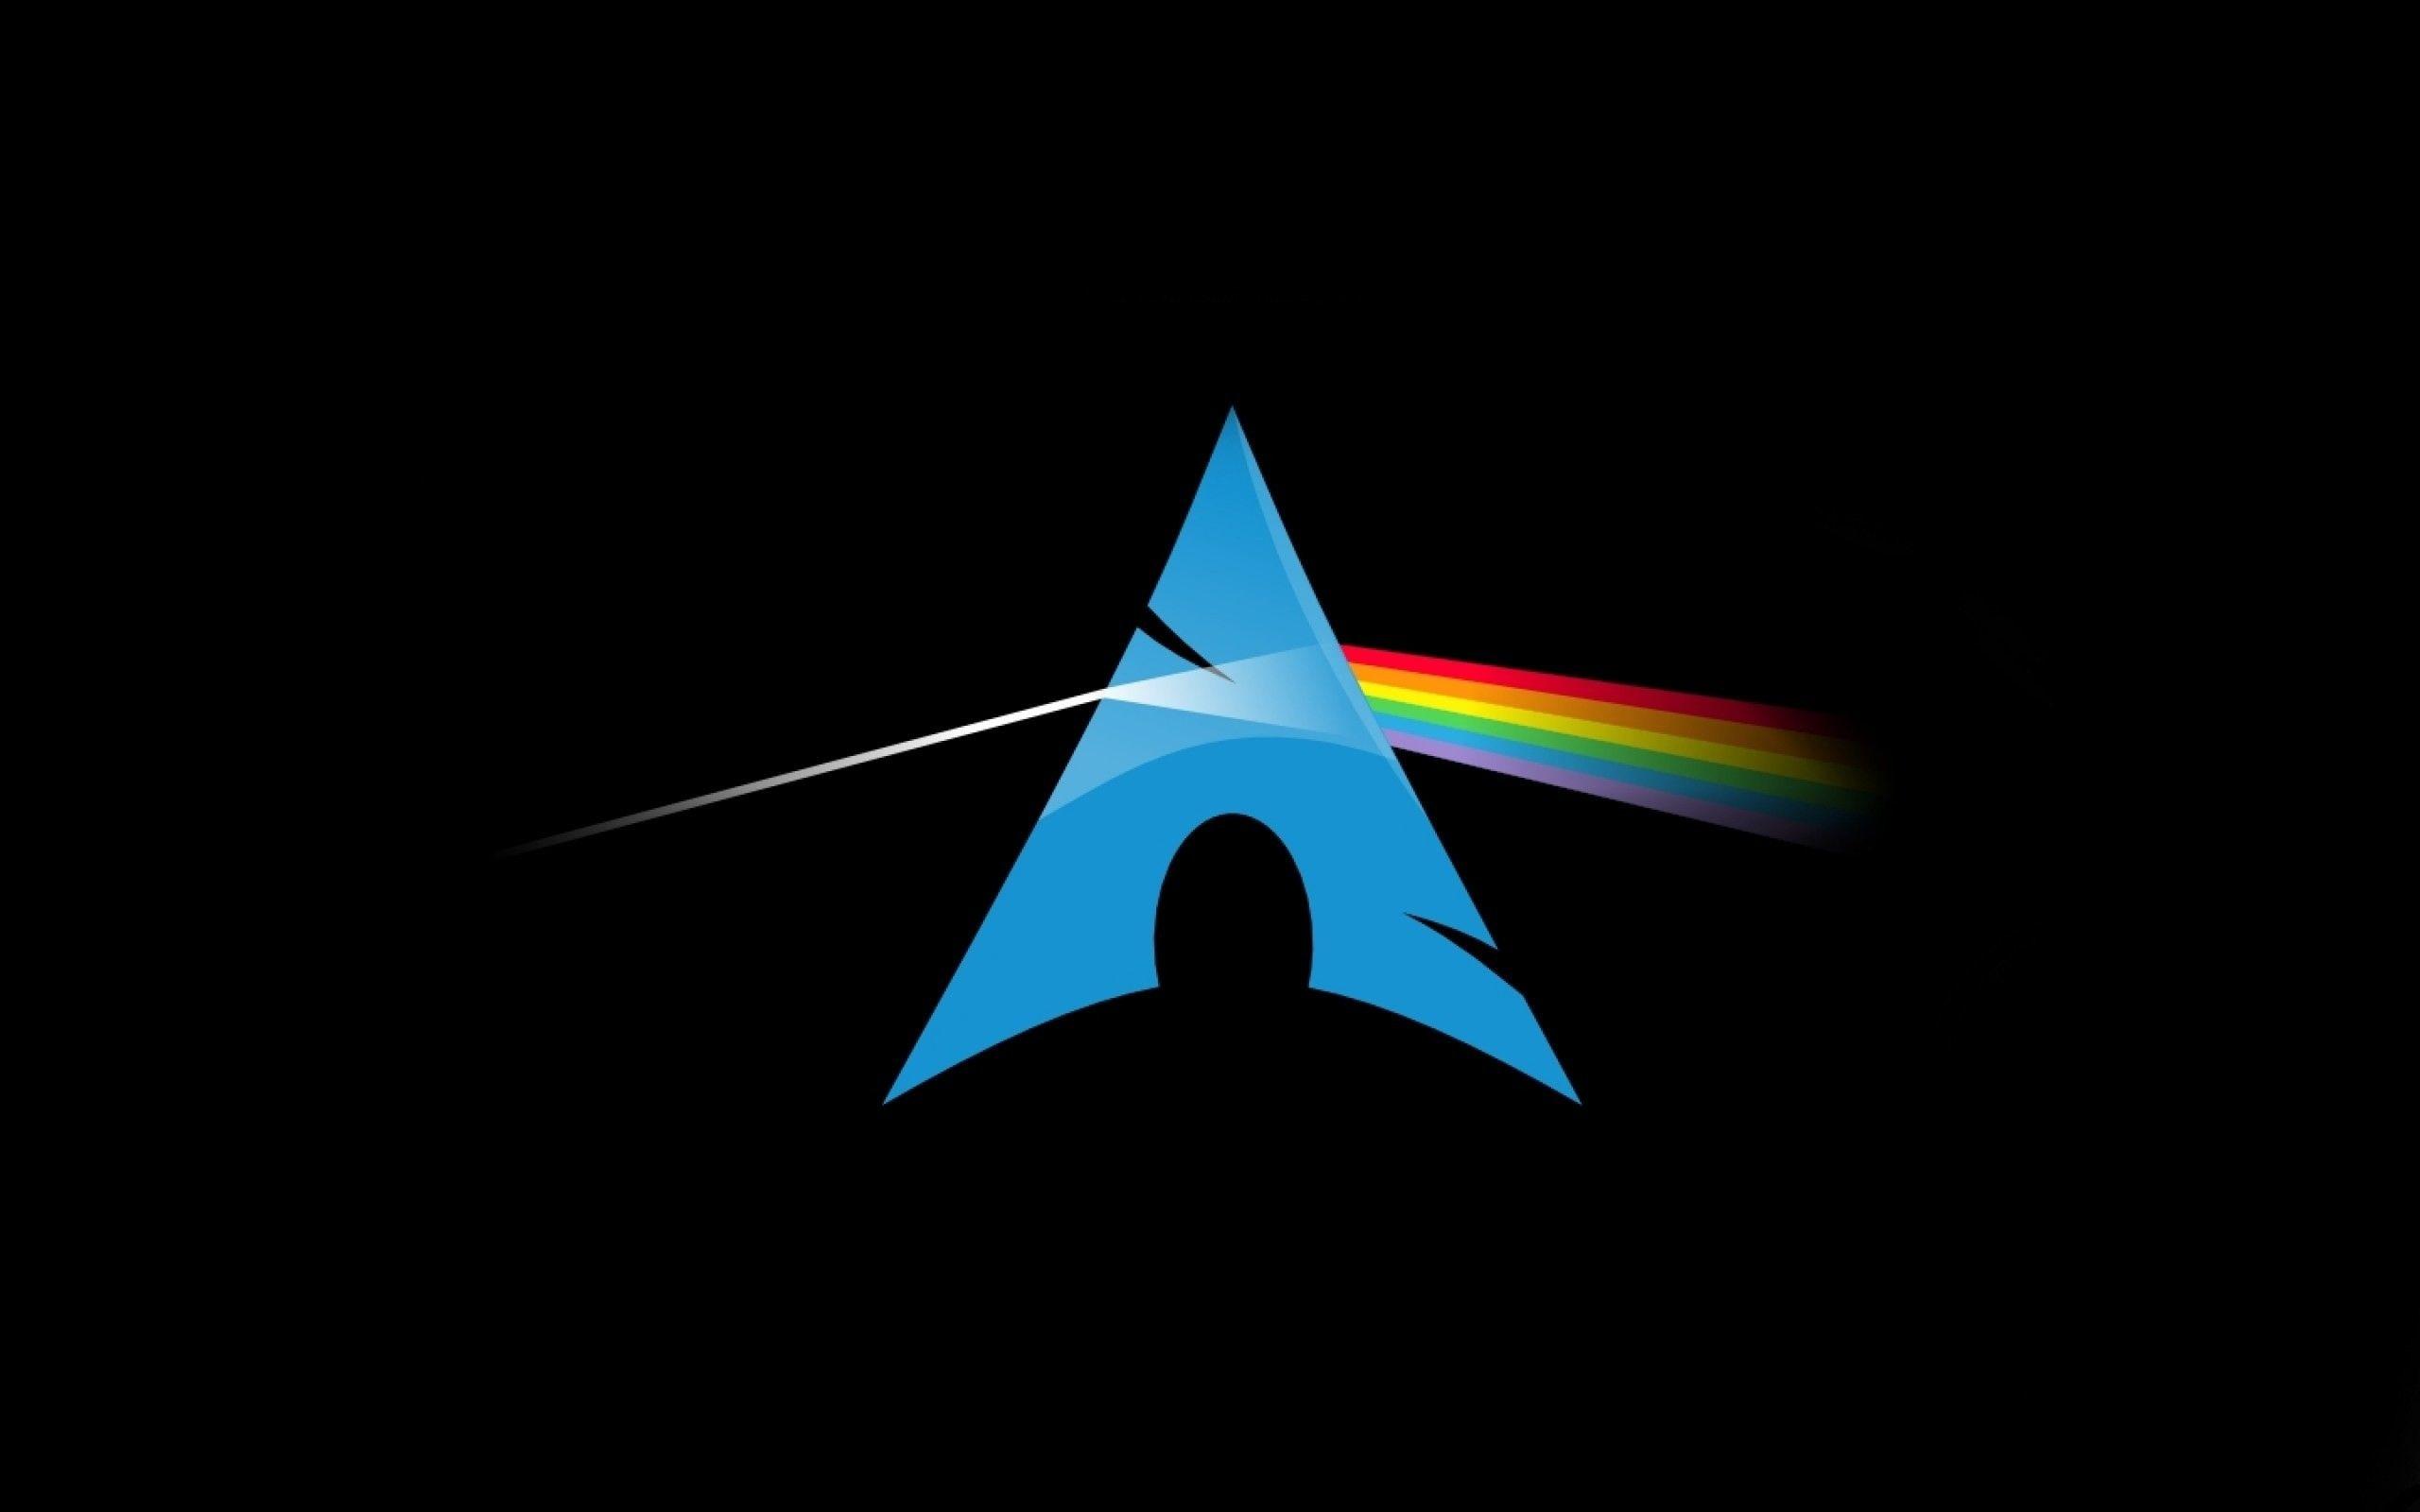 Dark Side of the Moon Wallpapers